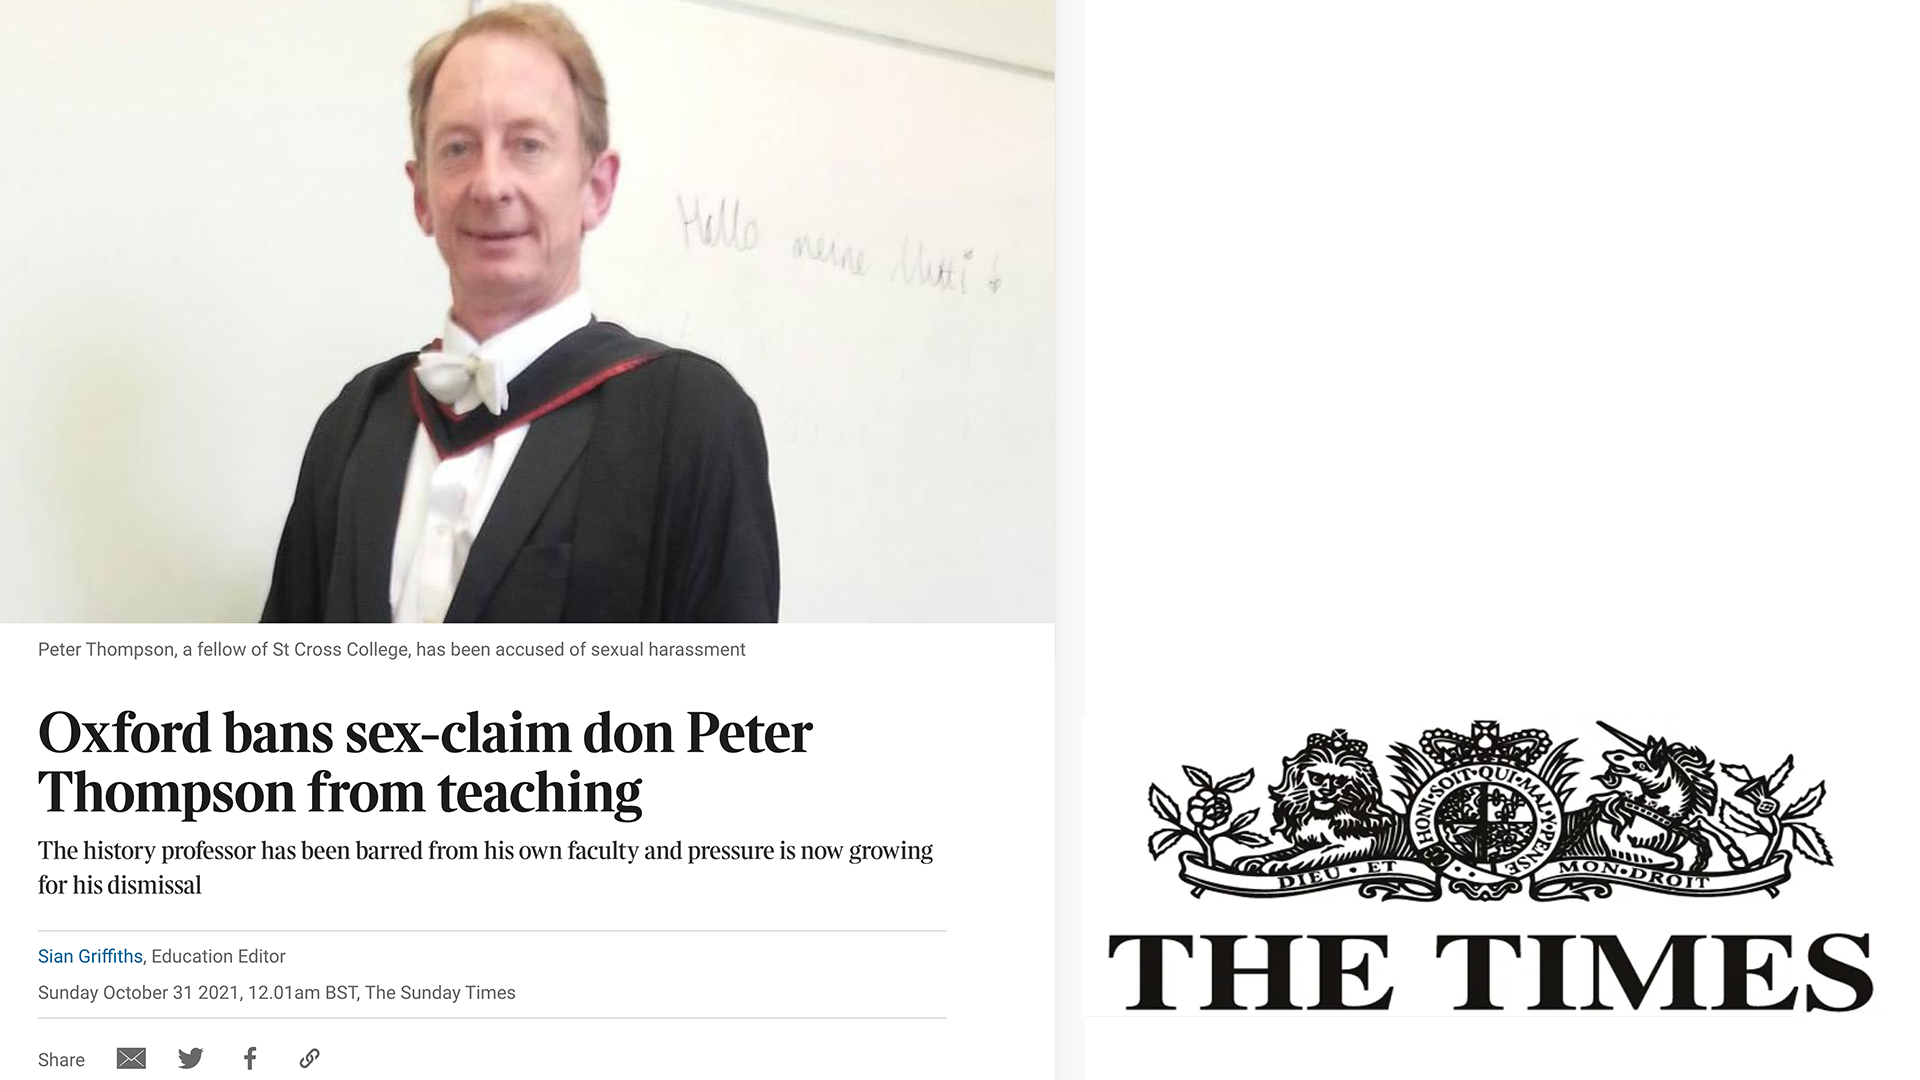 Oxford bans sex-claim don Peter Thompson from teaching